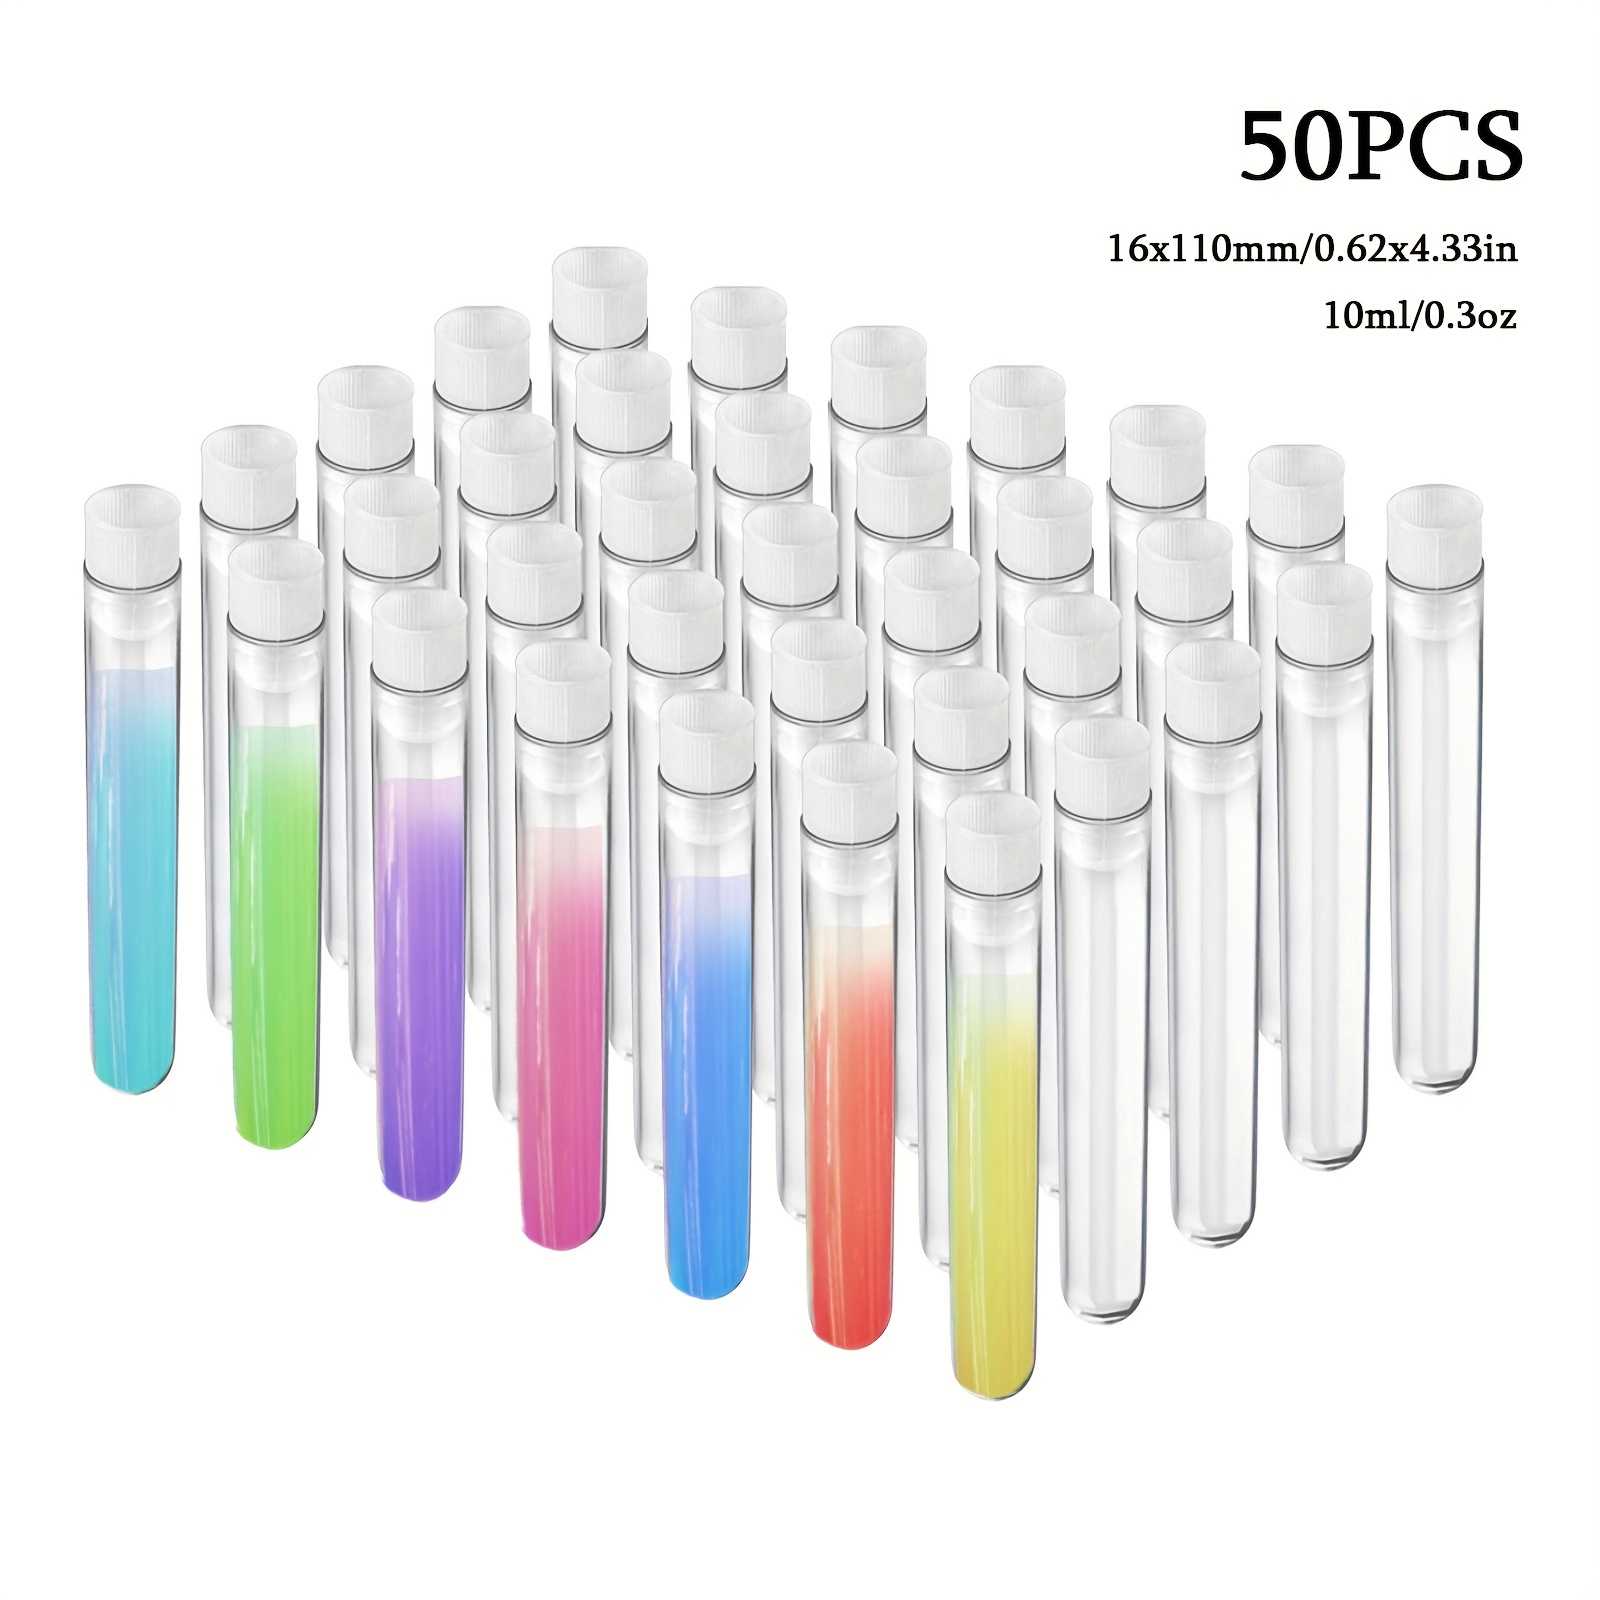 

50pcs Clear Plastic Test Tubes With Caps - Perfect For Scientific Experiments, Party Decorations, Candy Storage (16x110mm/0.62x4.33in, 10ml/0.3oz)